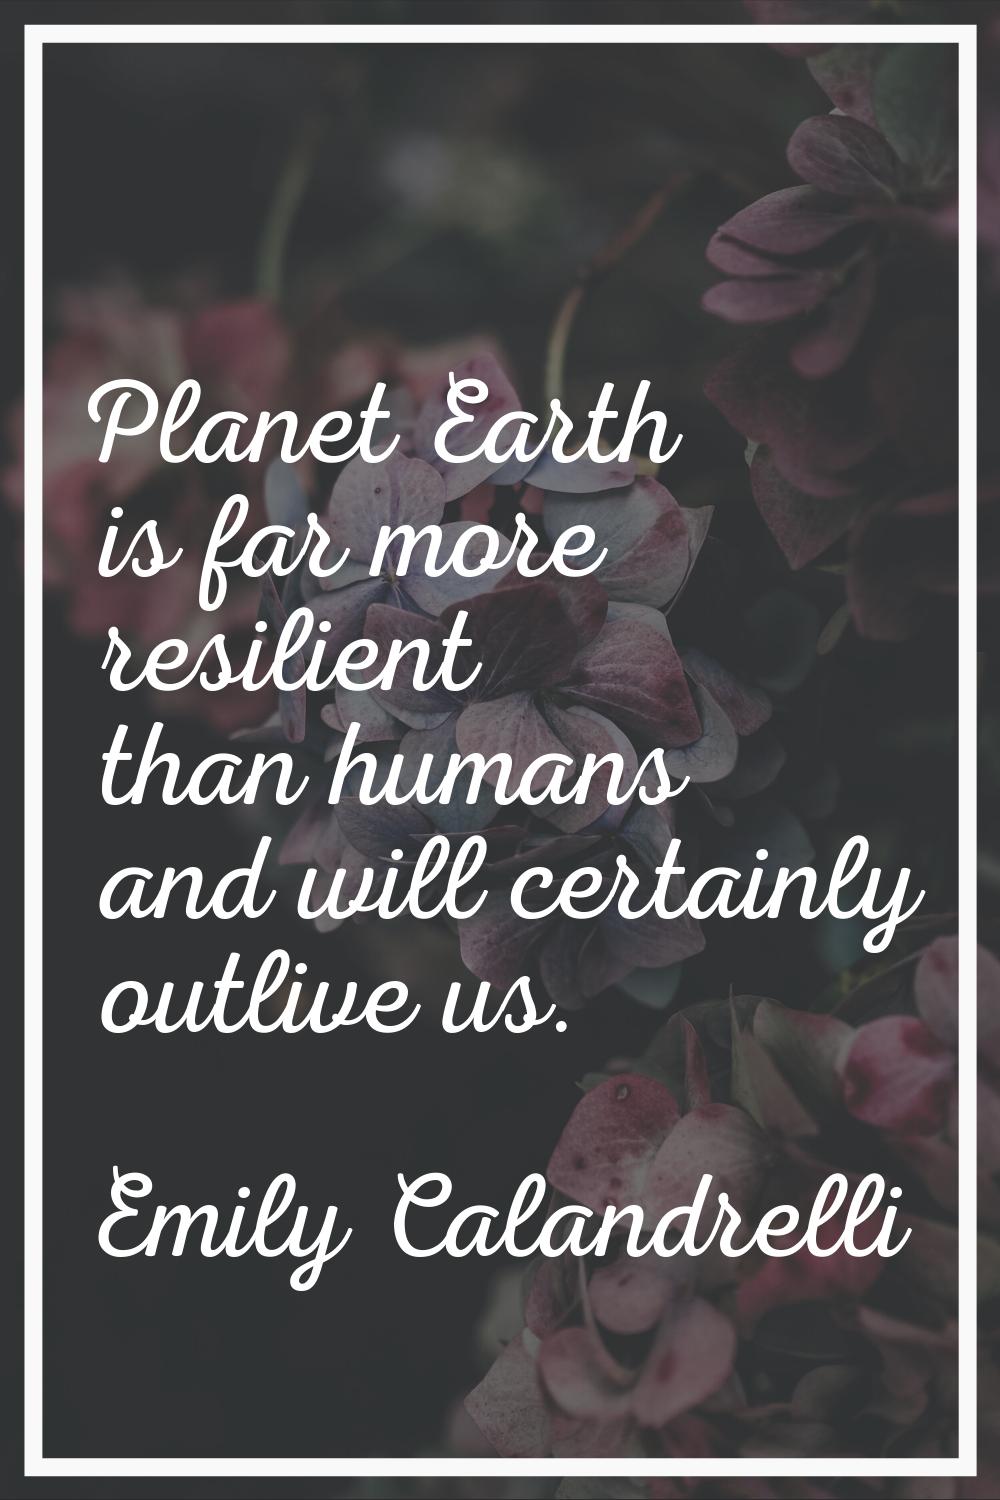 Planet Earth is far more resilient than humans and will certainly outlive us.